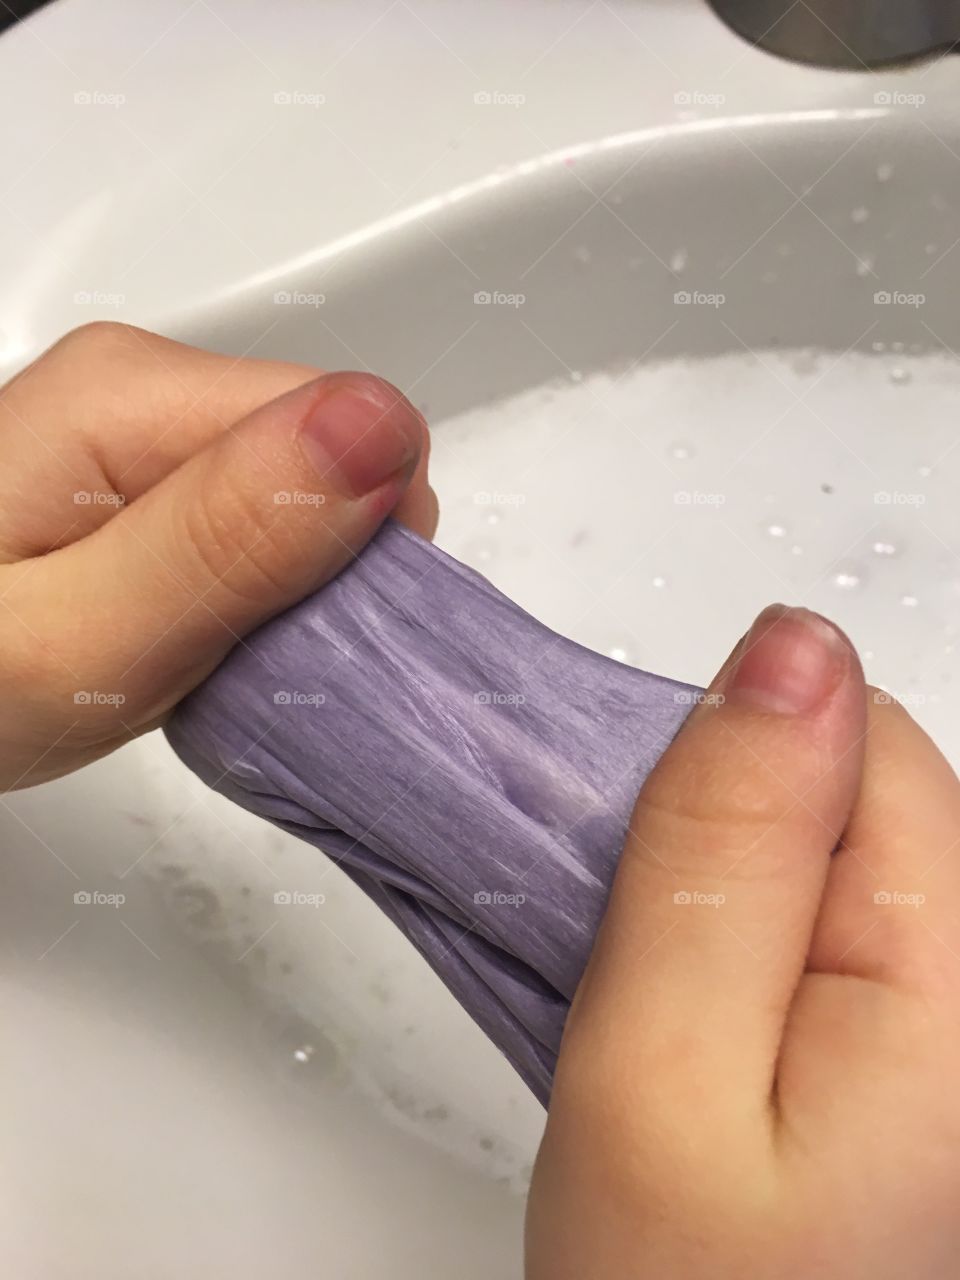 Child making homemade purple slime over a white sink filled with soapy suds and bubbles. 